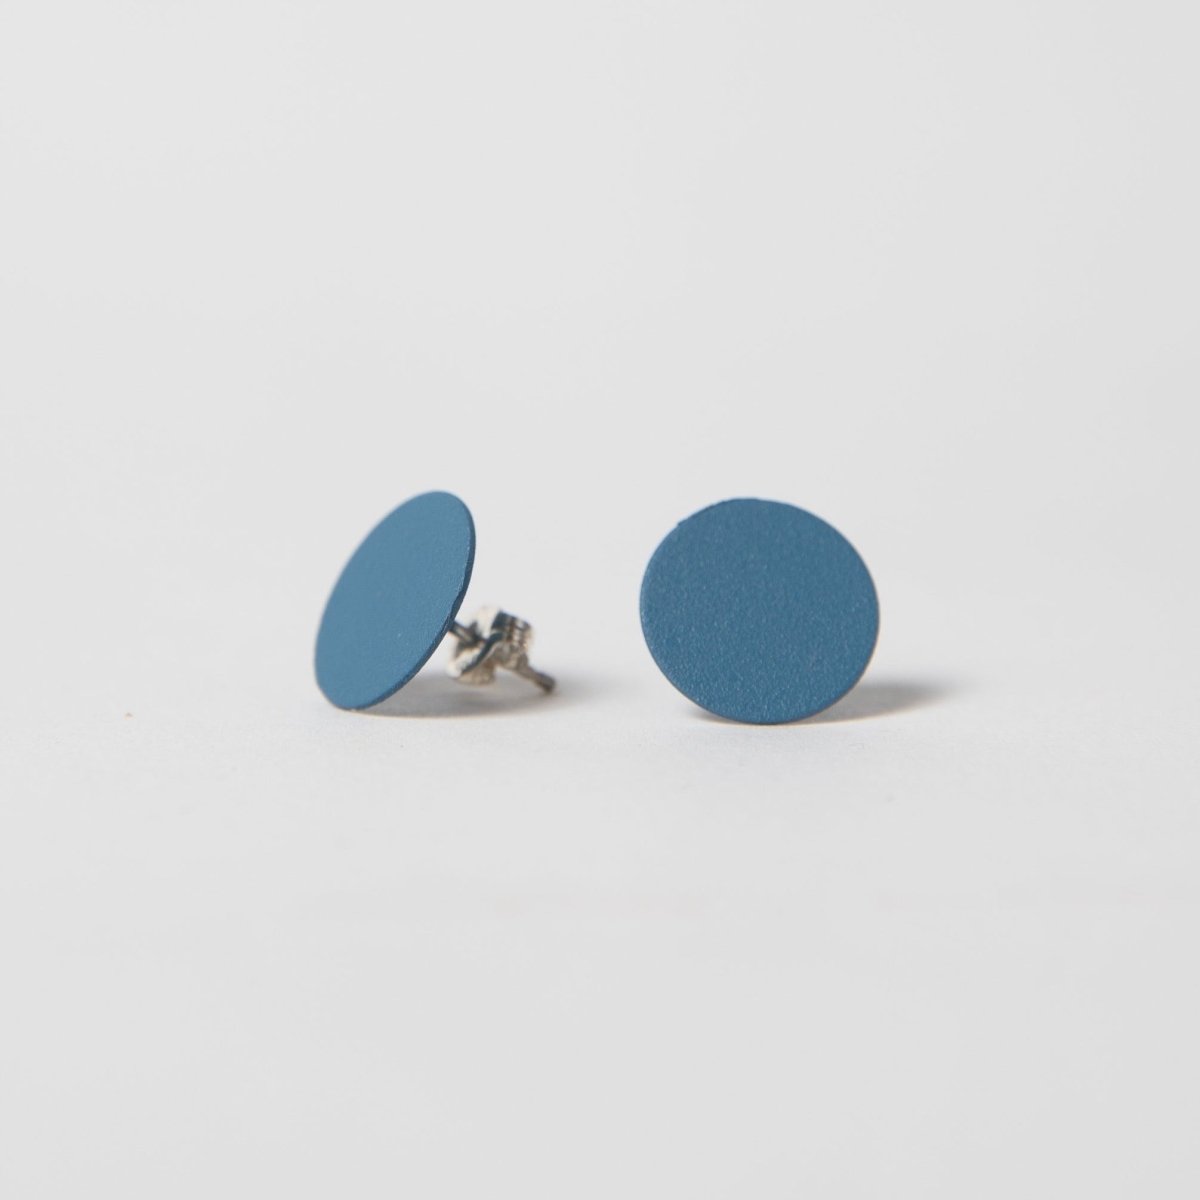 A round flat stud earring in dark blue. The Dot Earrings in Cobalt are designed and crafted by Pretti.cool in Houston, Texas.